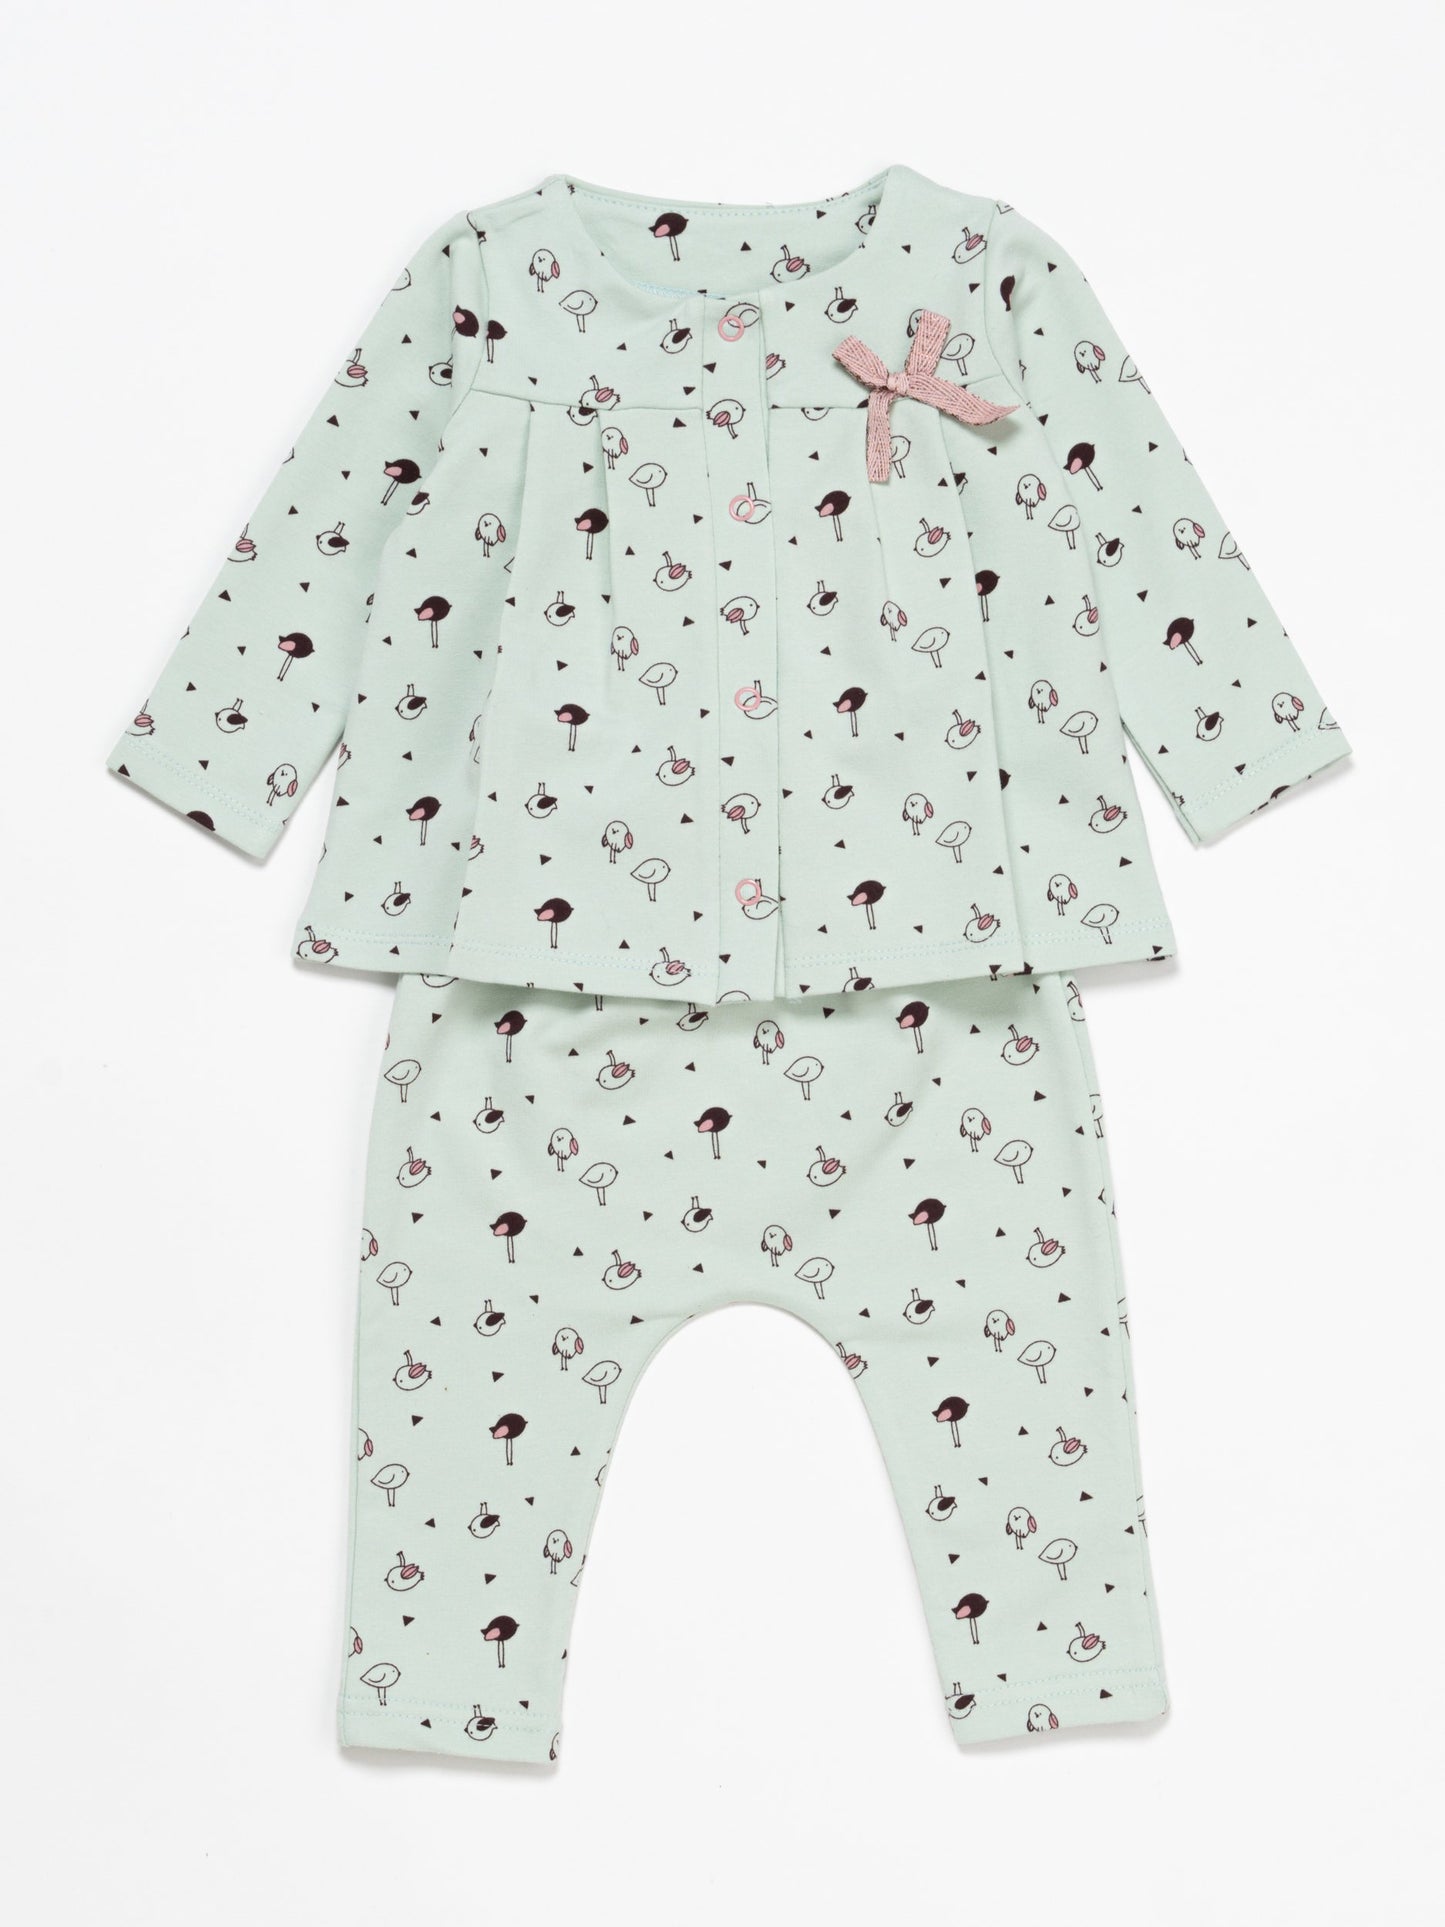 Artie - Little Chicks Pale Green 2 Piece Top and Bottoms Outfit - 3 to 6 and 9 to 12 months - Stylemykid.com